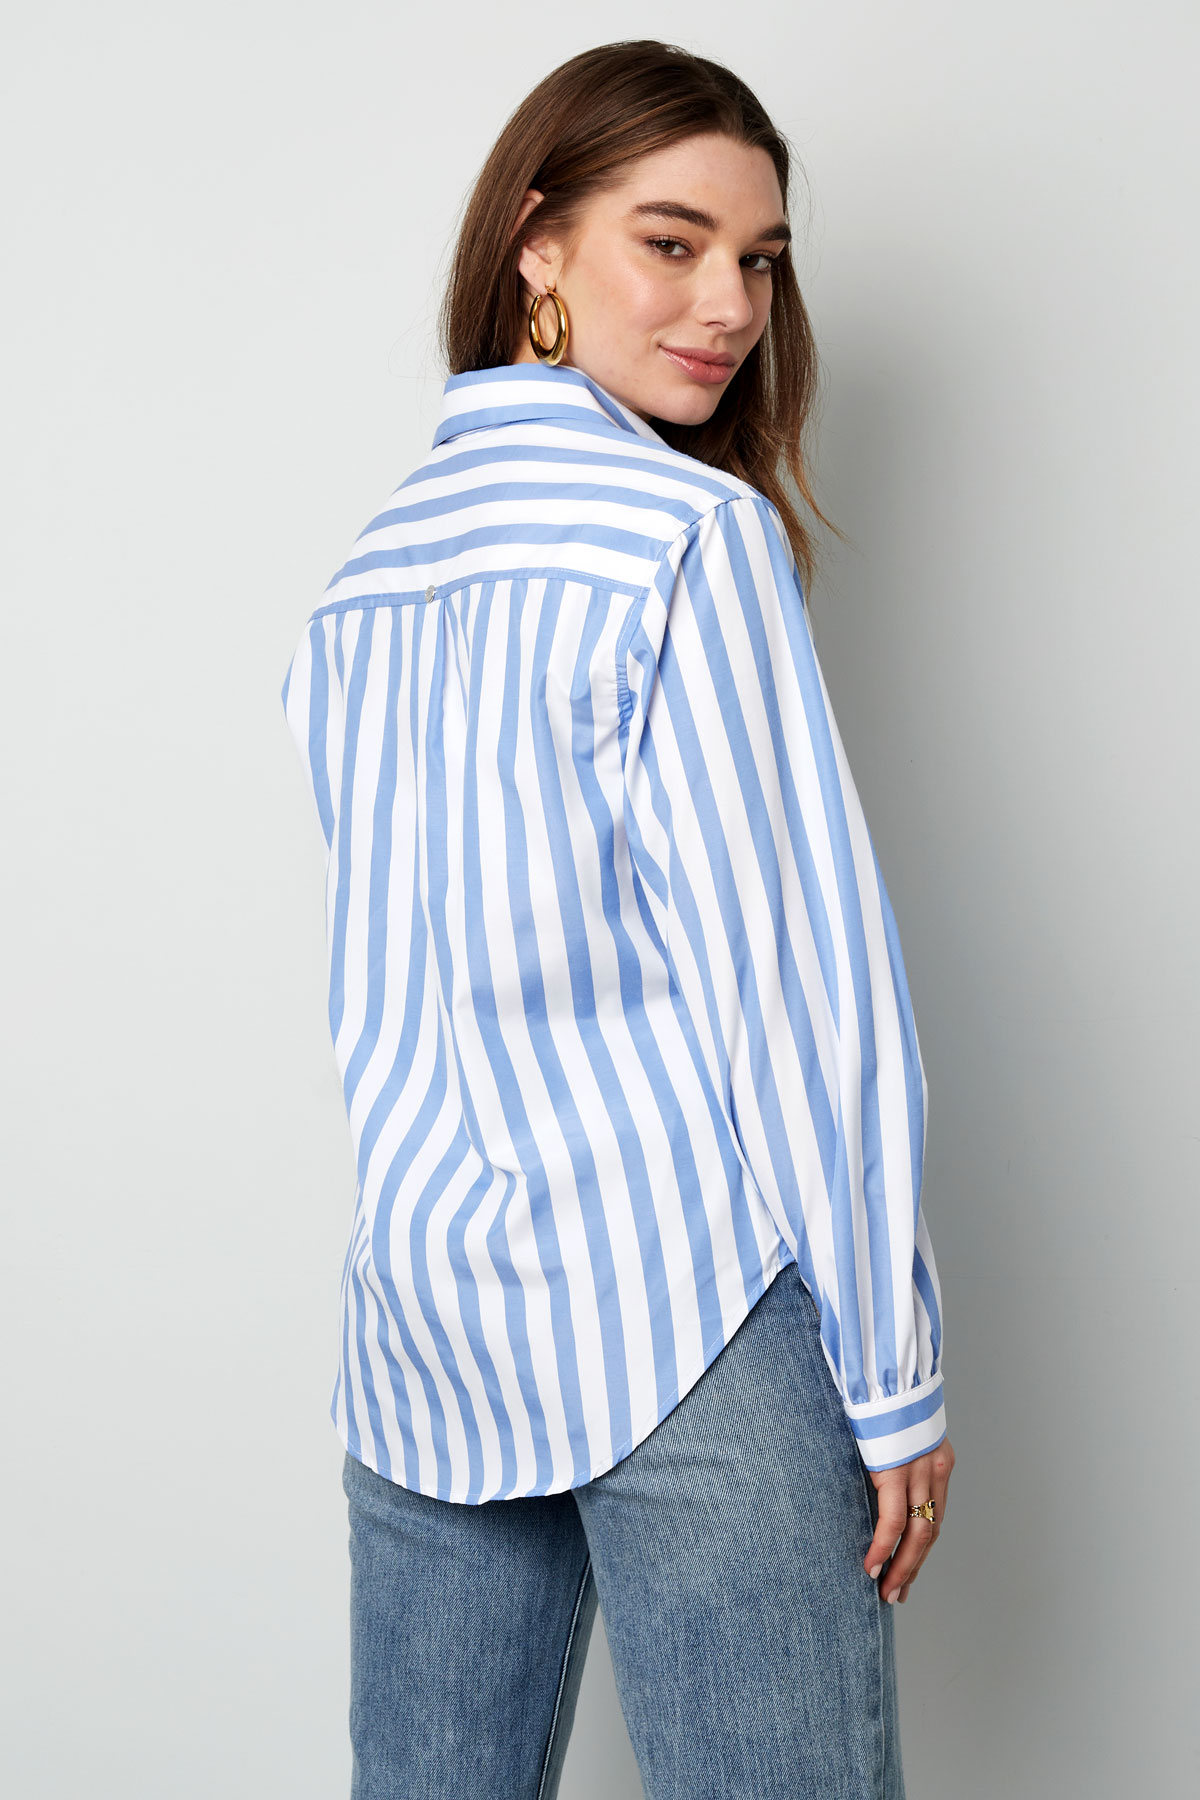 Striped casual blouse - black and white Picture10